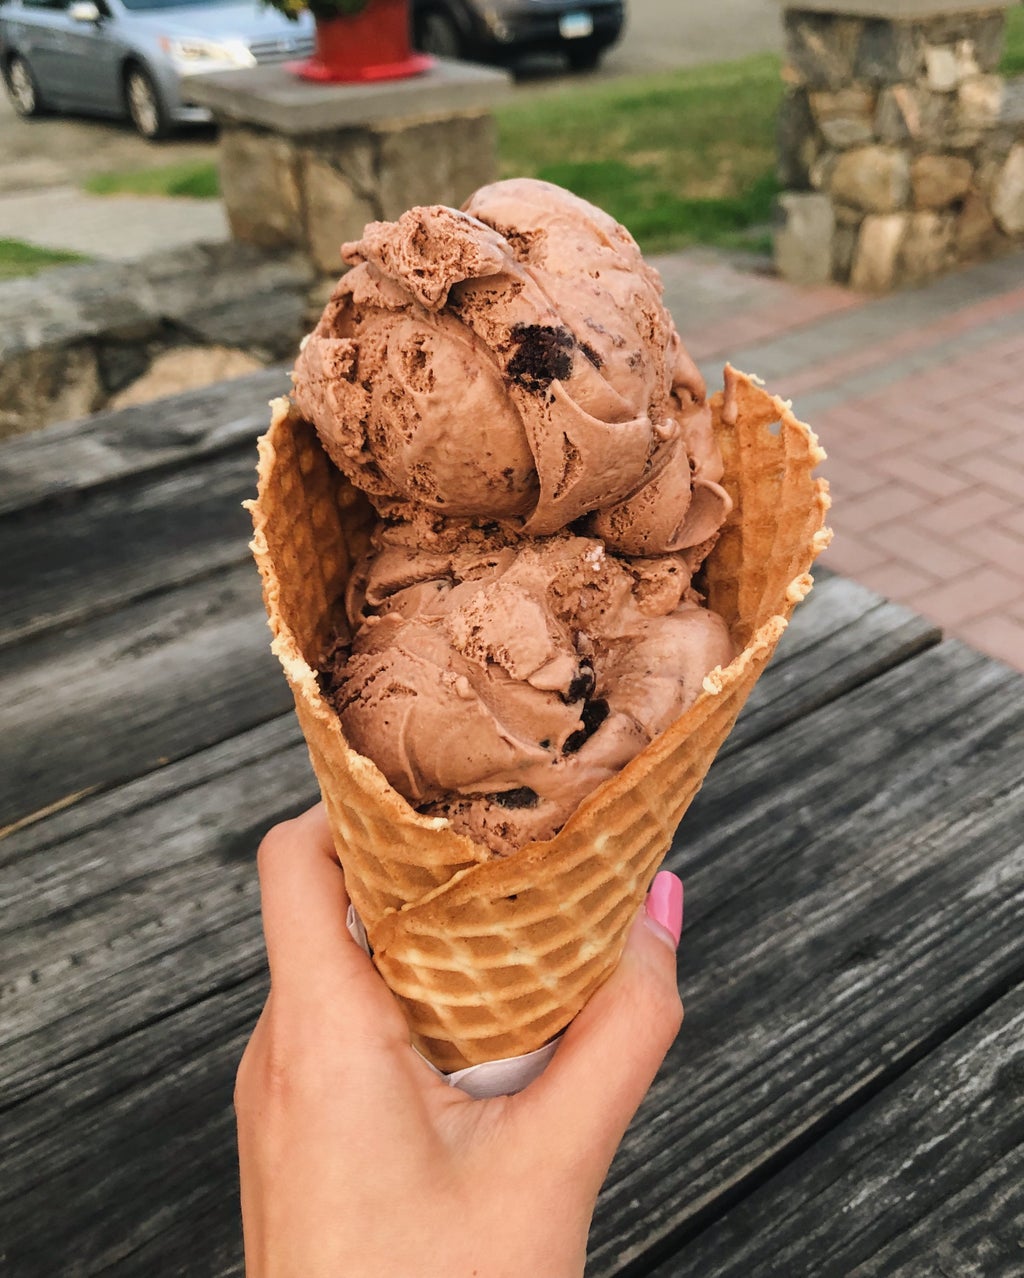 Chocolate ice cream in a waffle cone at Rich Farms in Connecticut.